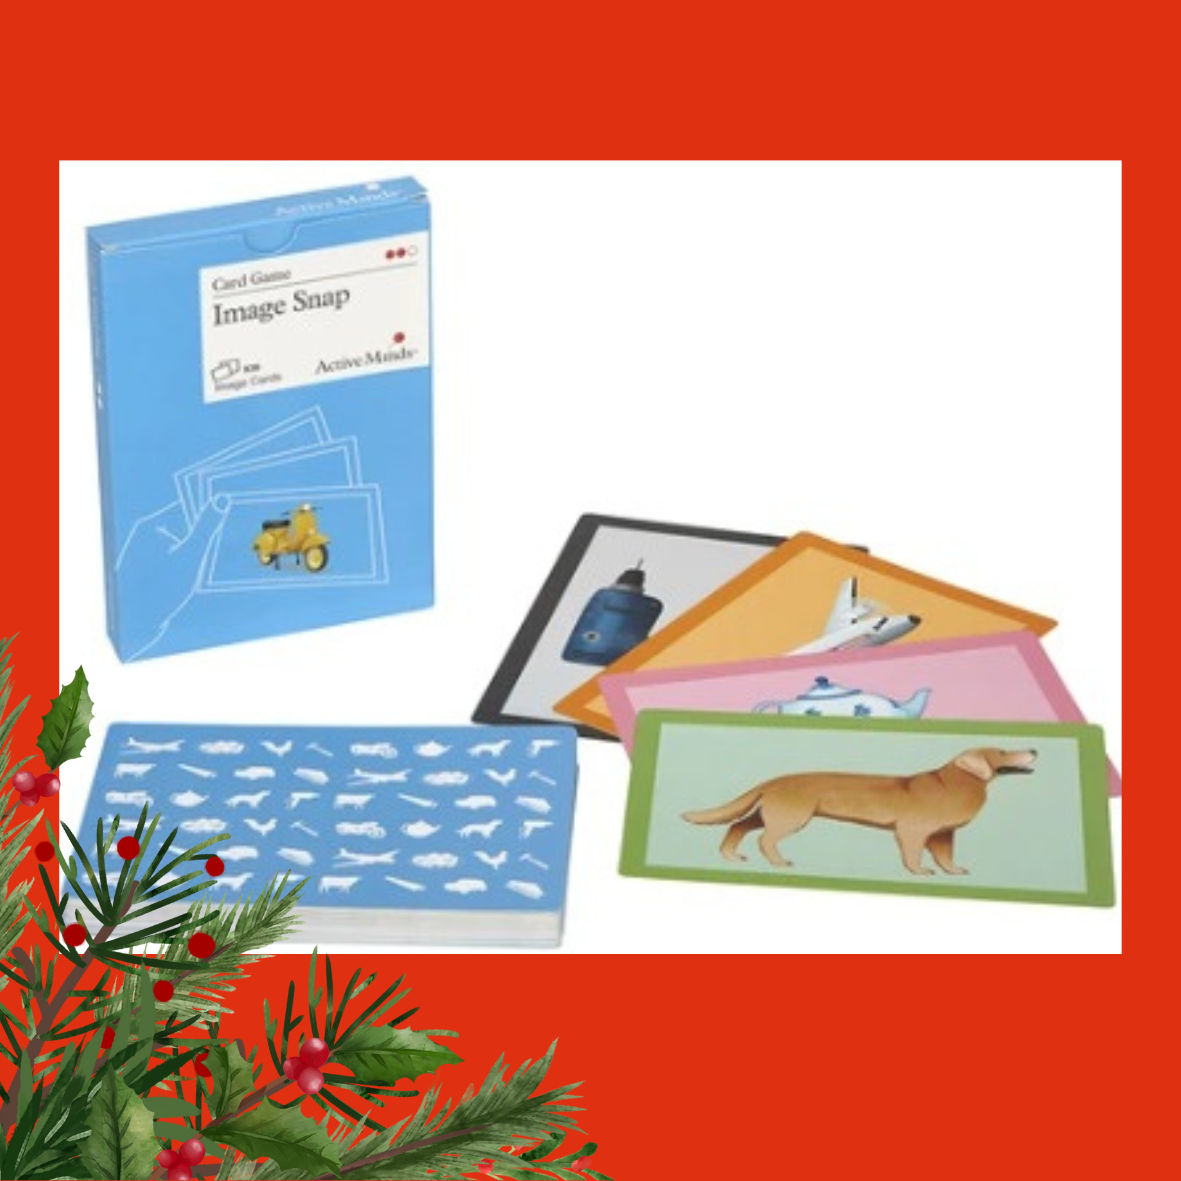 An image of category snap. There are 4 different cards on show, all brightly coloured. One is of a dog, another is a teapot, one is a plane and the last one is a drill. They are on a red background and there is holly and red berries in the left corner of the image.